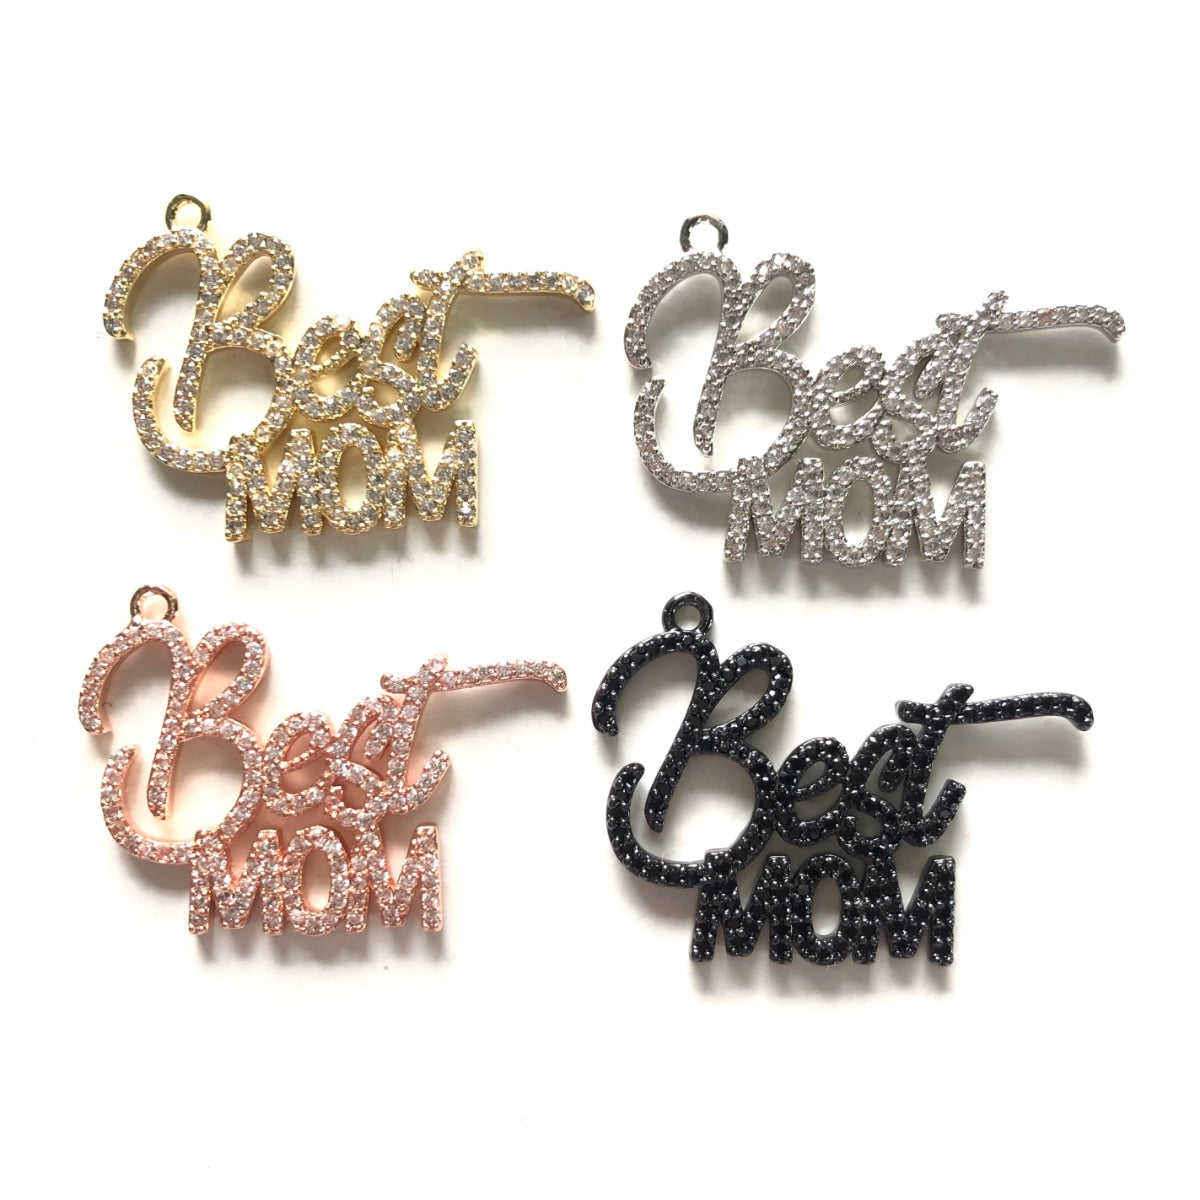 10pcs/lot 35*25.5mm CZ Pave Best Mom Charms for Mother's Day CZ Paved Charms Mother's Day Words & Quotes Charms Beads Beyond